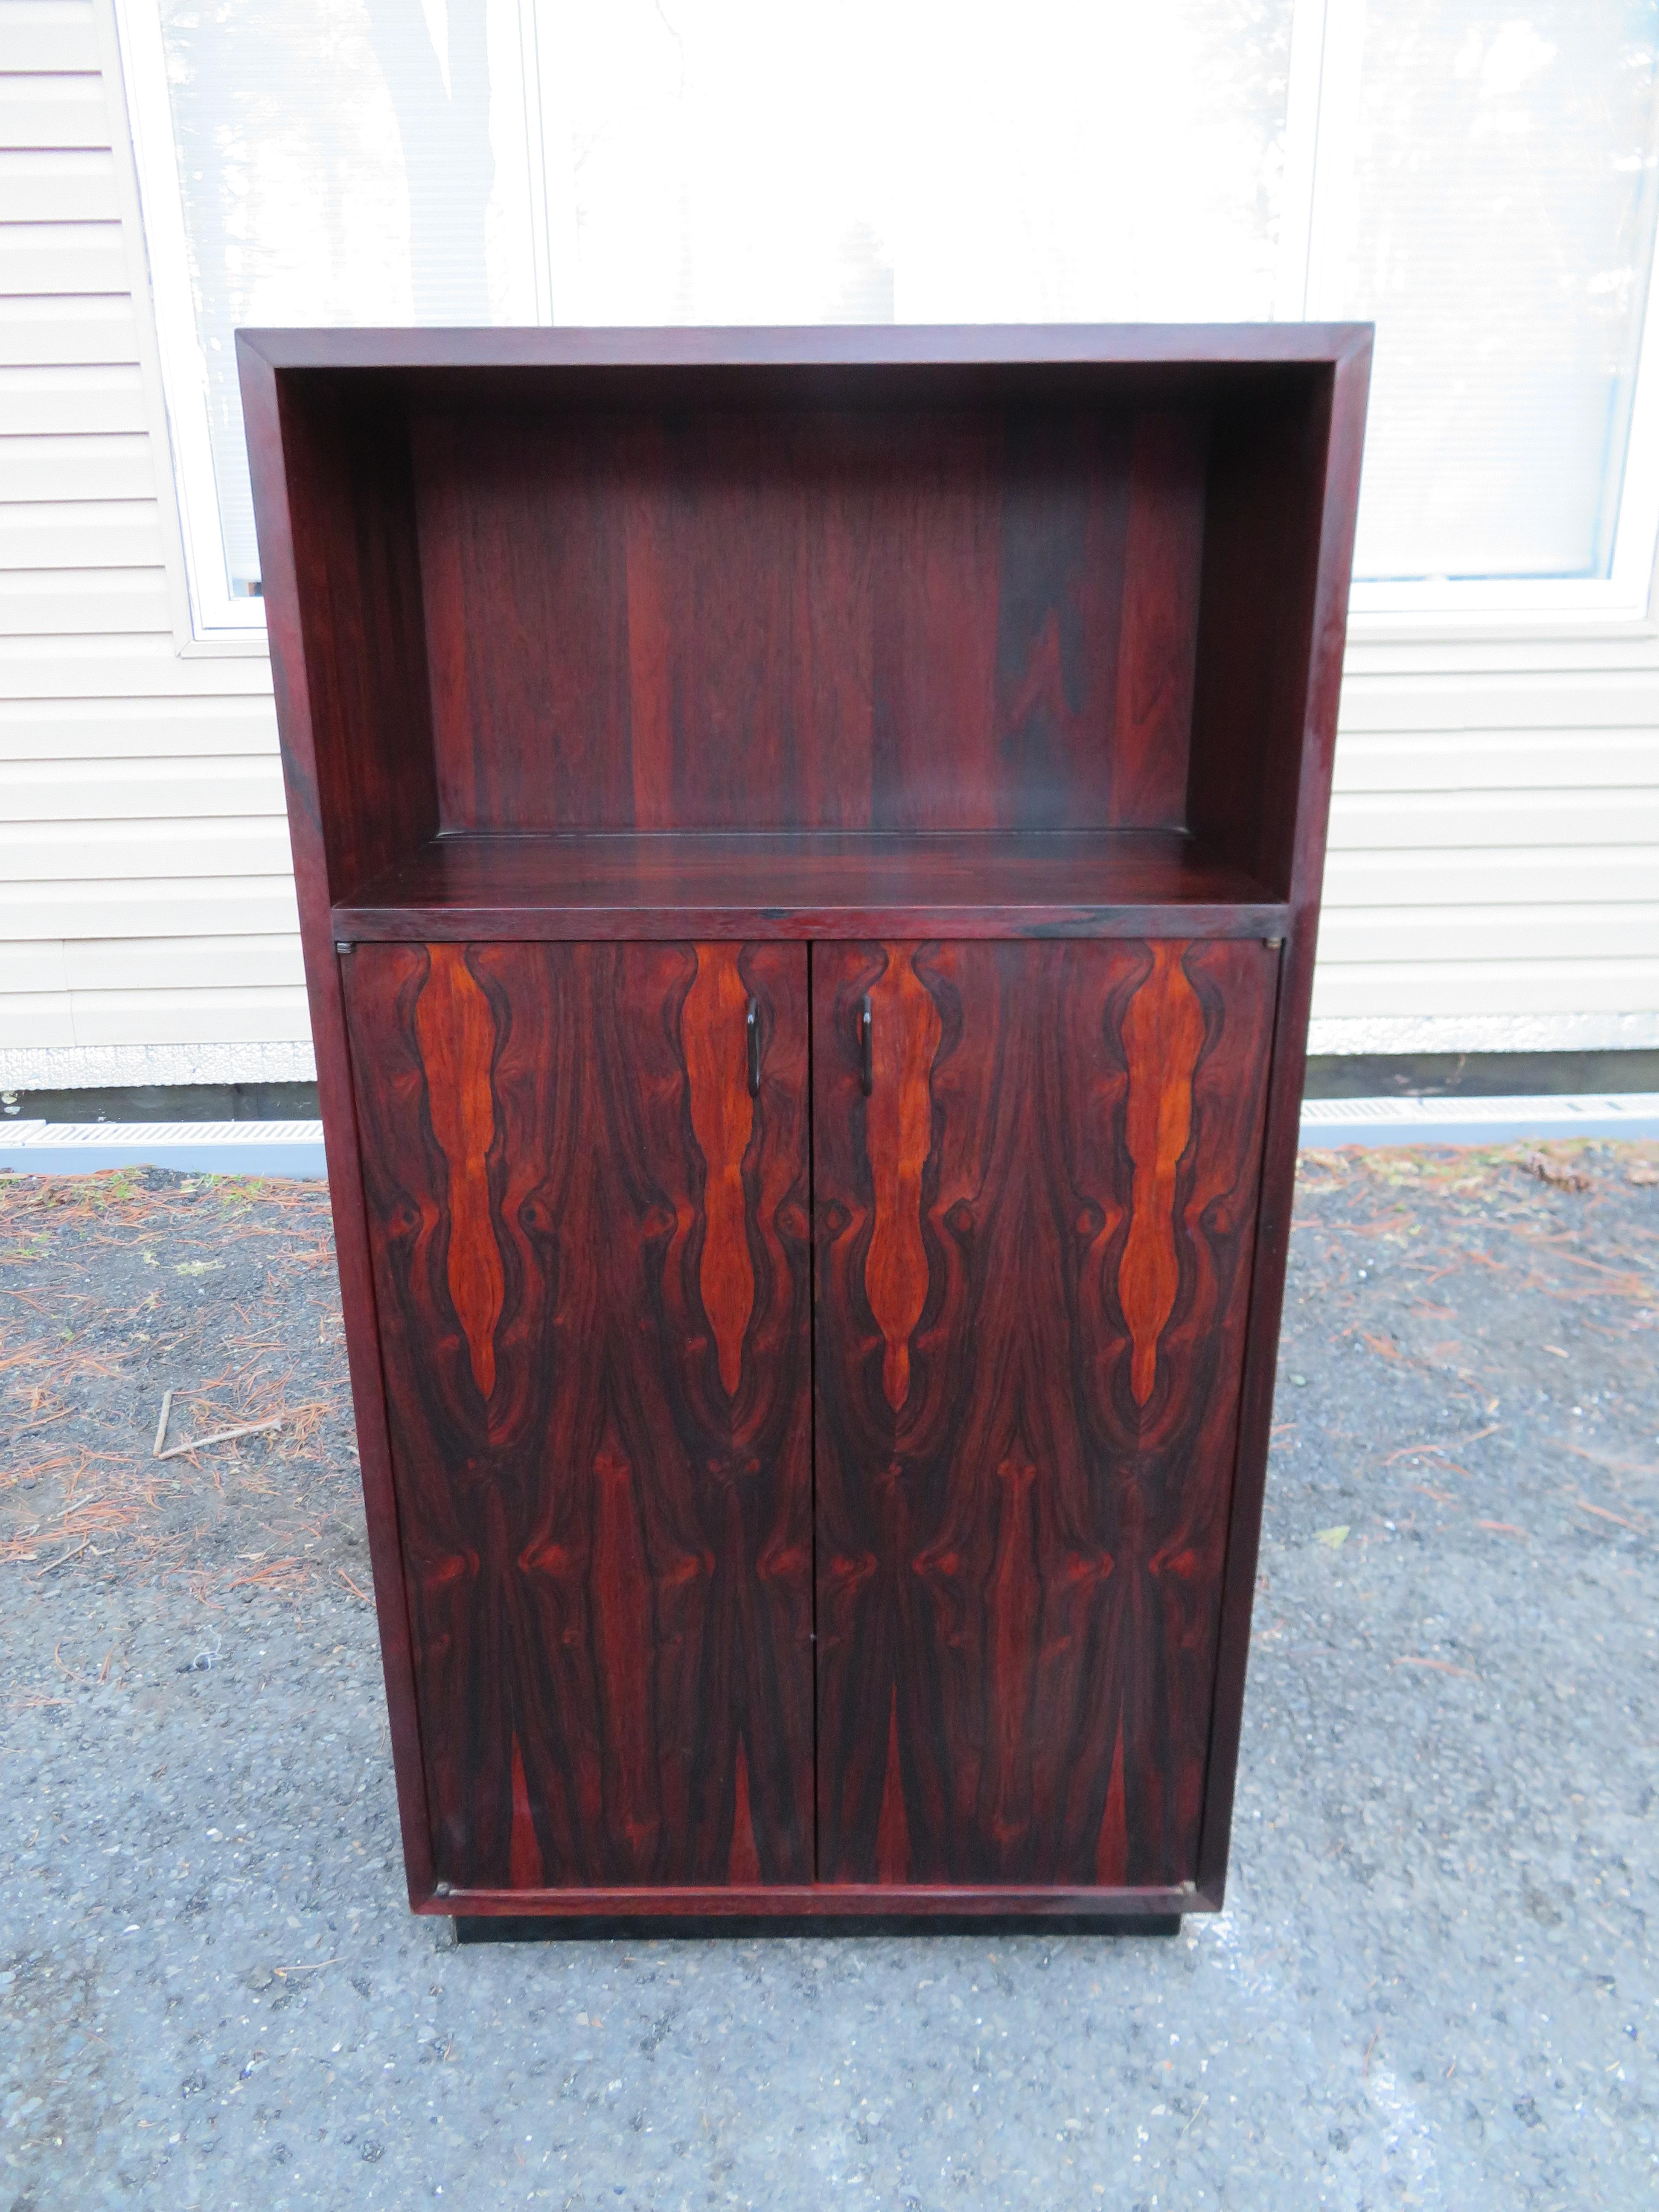 Jack Cartwright for Founders Brazilian rosewood bar cabinet. This piece has been well cared for and is in wonderful vintage condition. The rosewood has tons of graning and has a deep dark colour, it must have never been exposed to sunlight. It